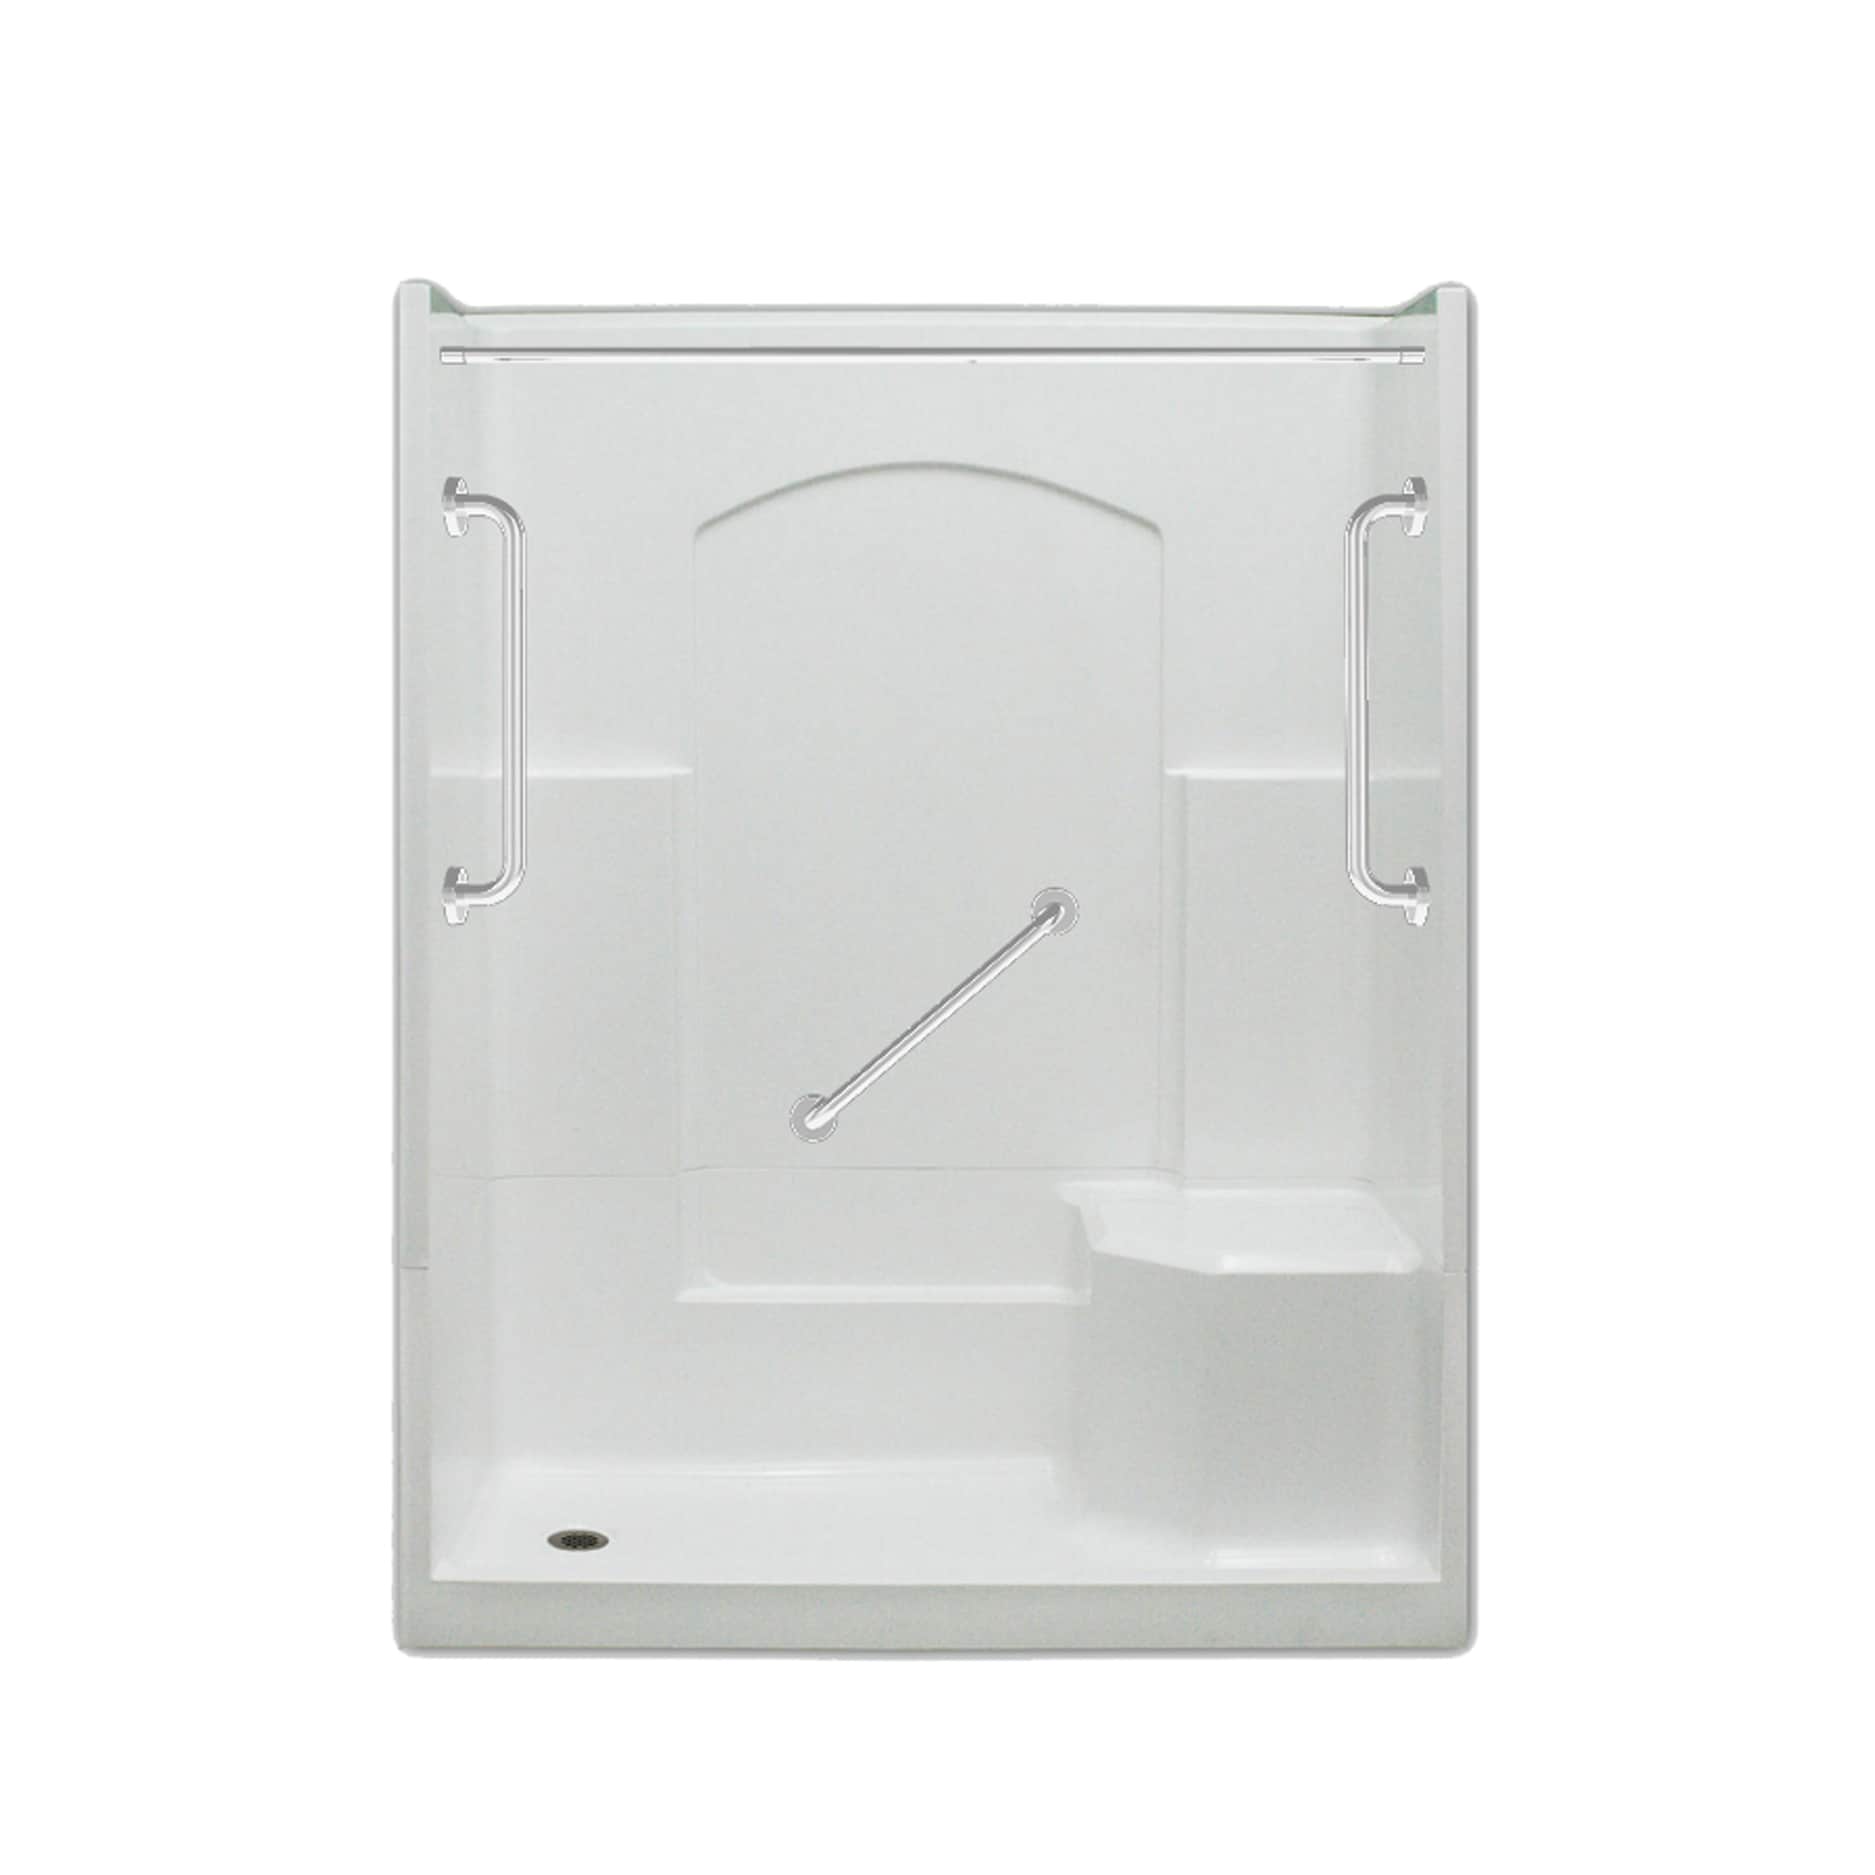 Laurel Mountain Ramer Low Threshold White 77-in x 32-in x 60-in Alcove Shower Kit with Integrated Seat (Left Drain) Stainless Steel | LM3260SH1S4PR064